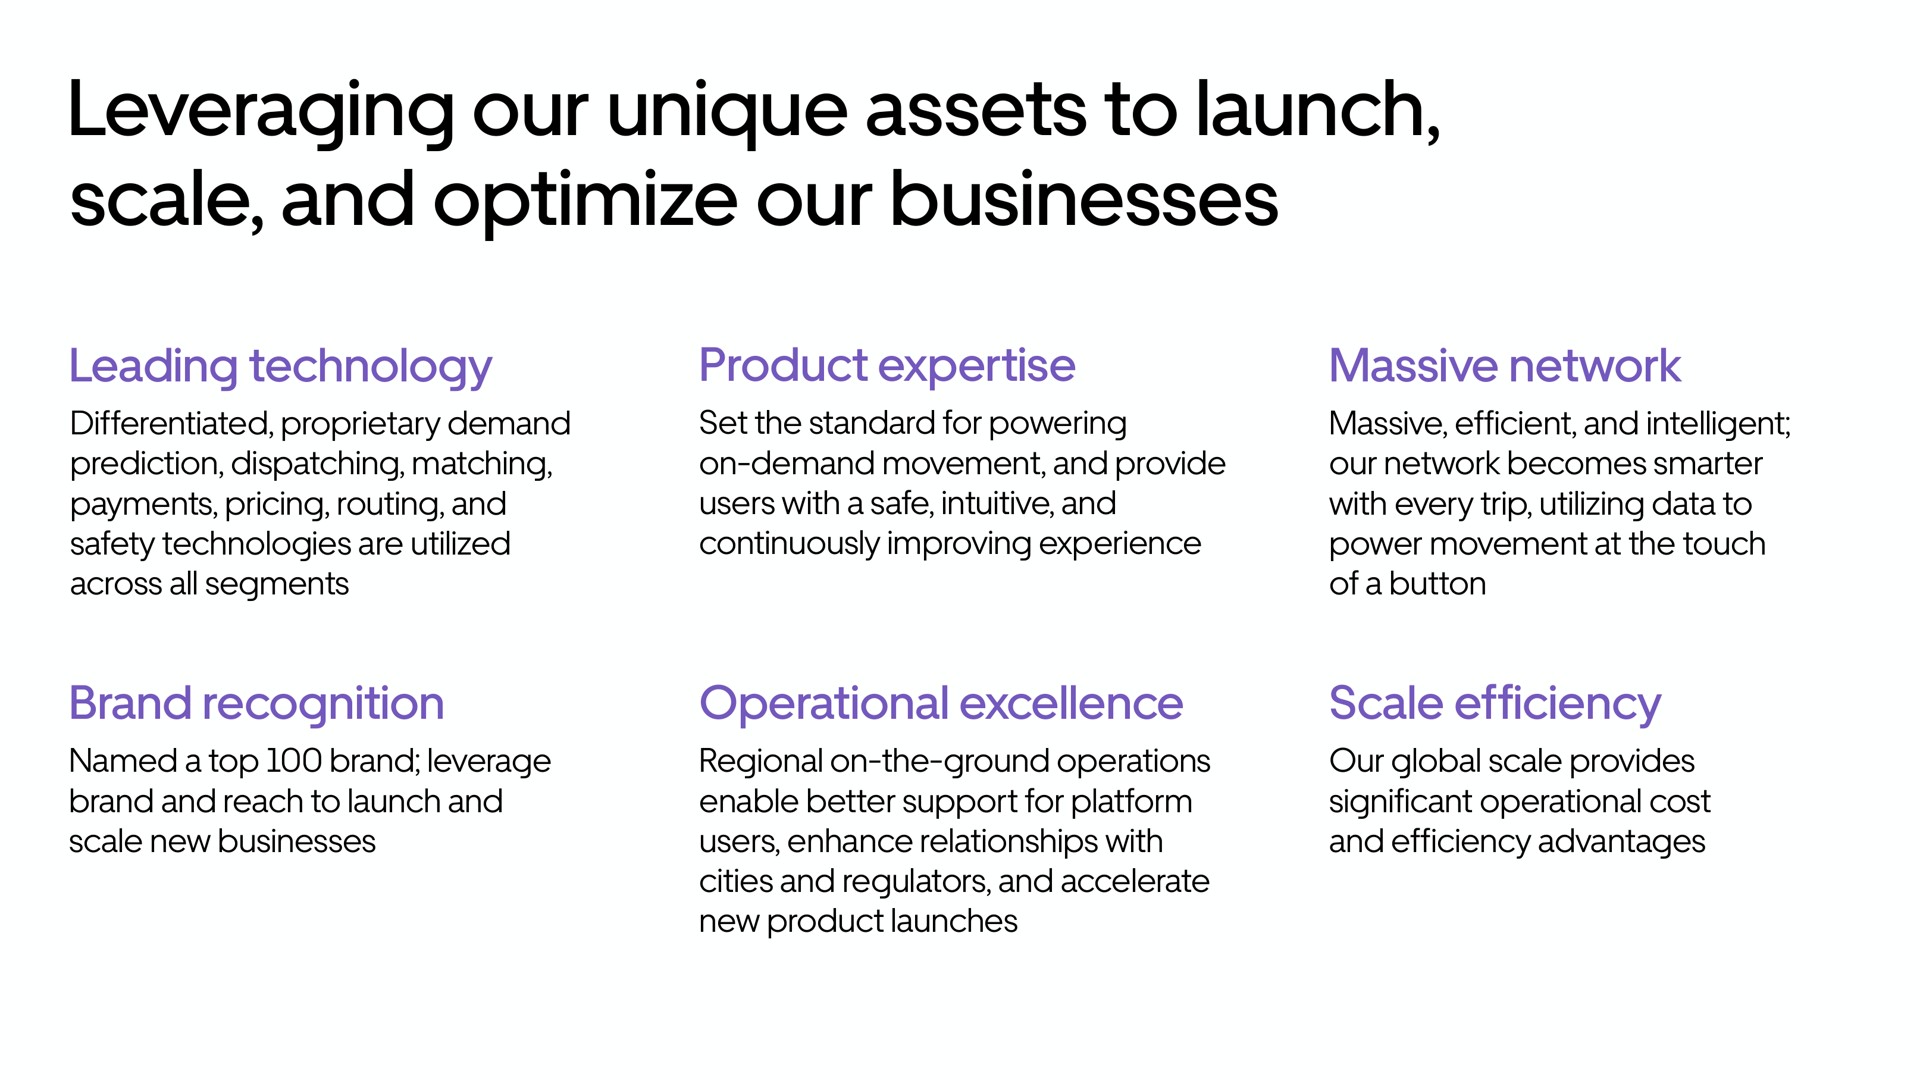 leveraging our unique assets to launch scale and optimize our businesses | Uber